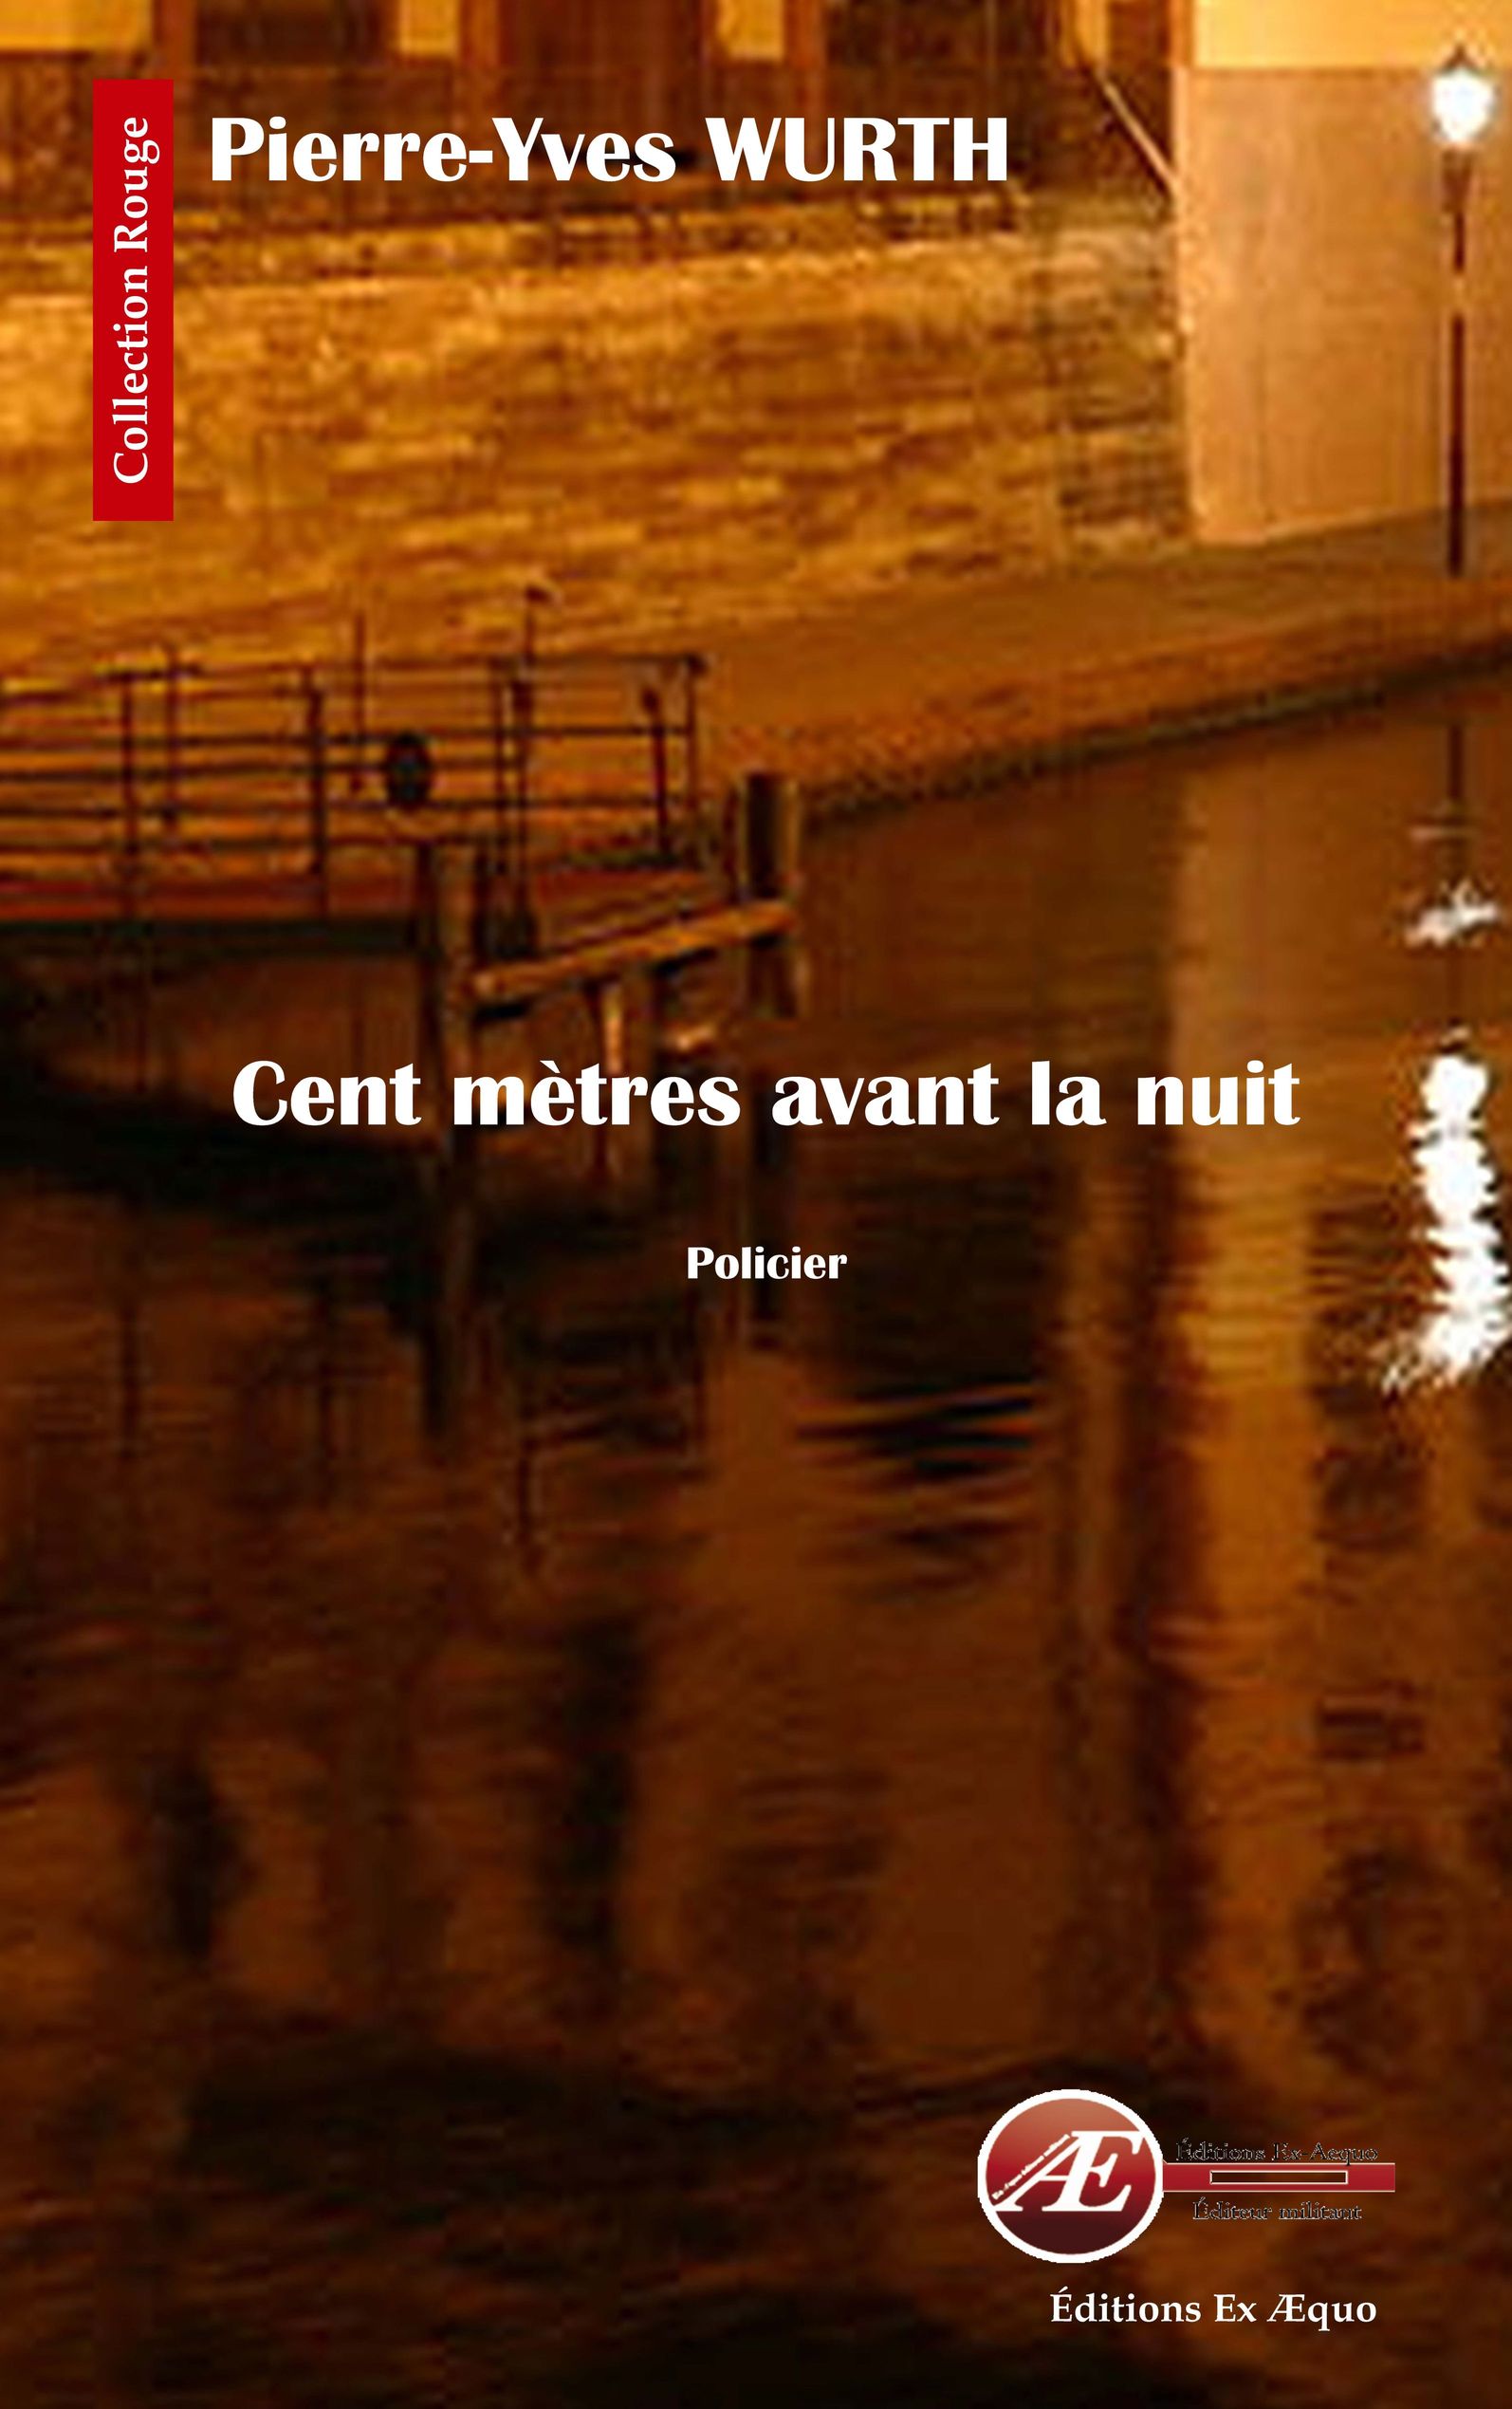 You are currently viewing Cent mètres avant la nuit, de Pierre-Yves Wurth